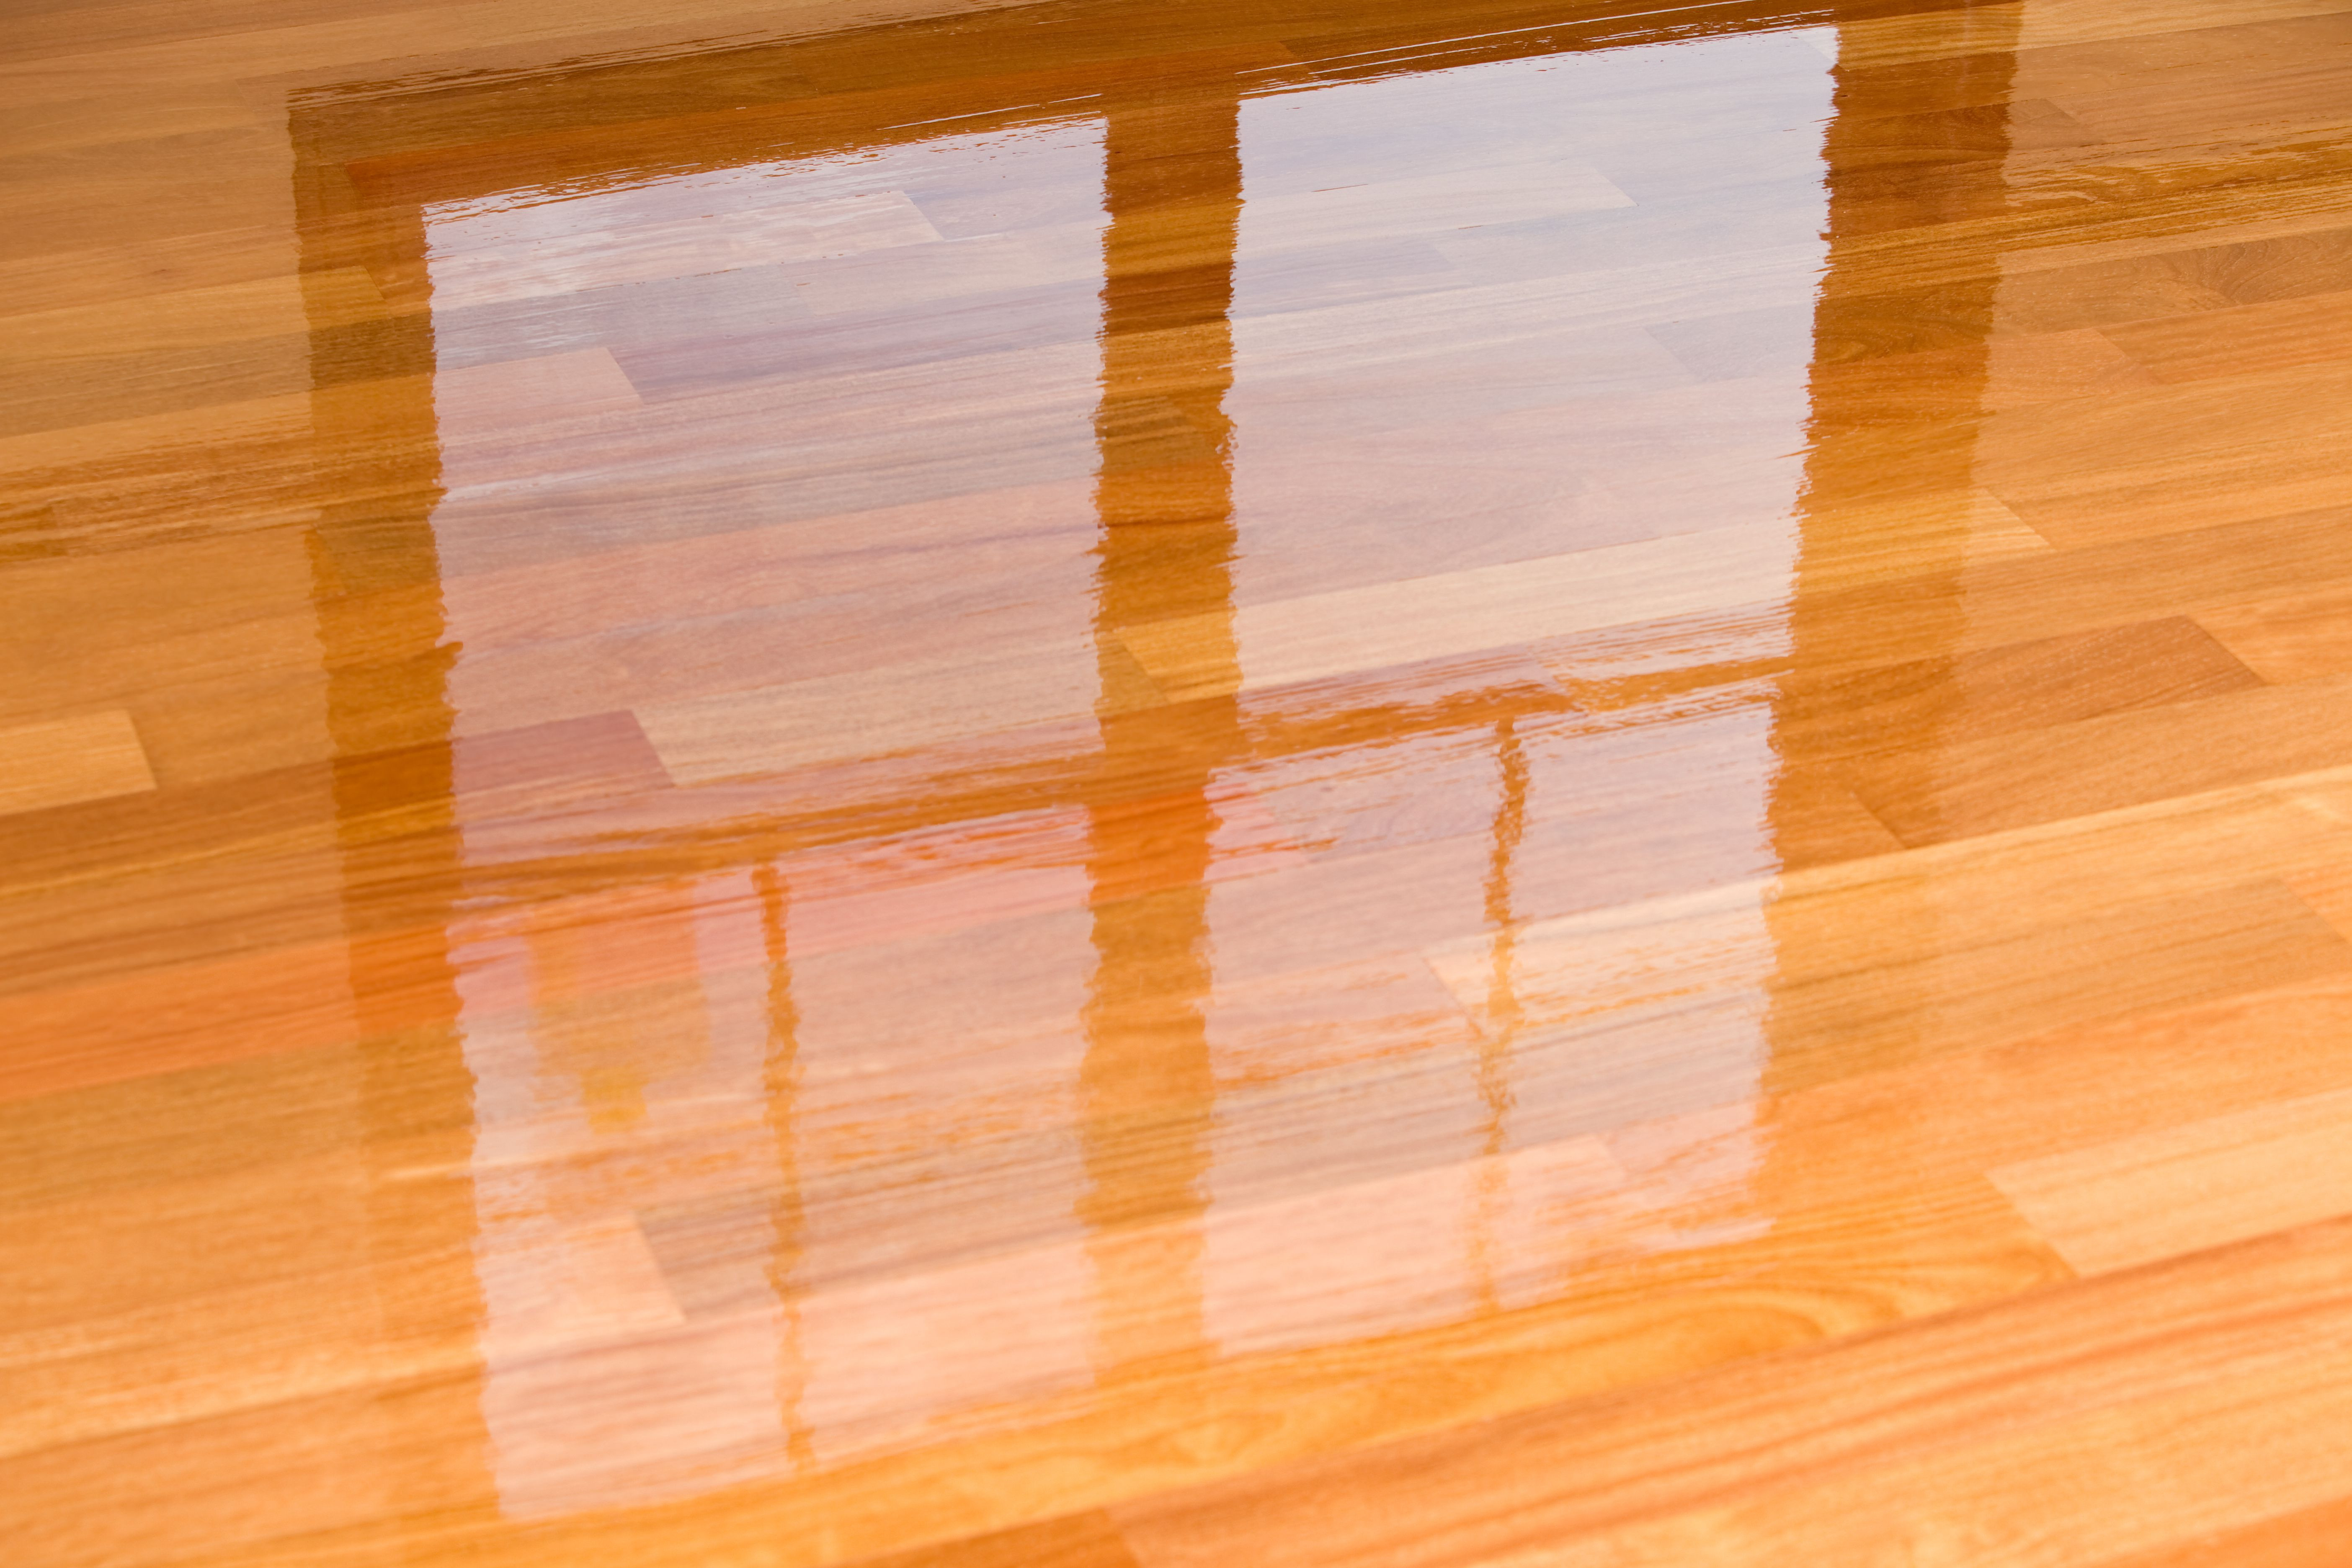 12 Ideal Superior Hardwood Flooring Reviews 2024 free download superior hardwood flooring reviews of guide to laminate flooring water and damage repair with wet polyurethane on new hardwood floor with window reflection 183846705 582e34da3df78c6f6a403968